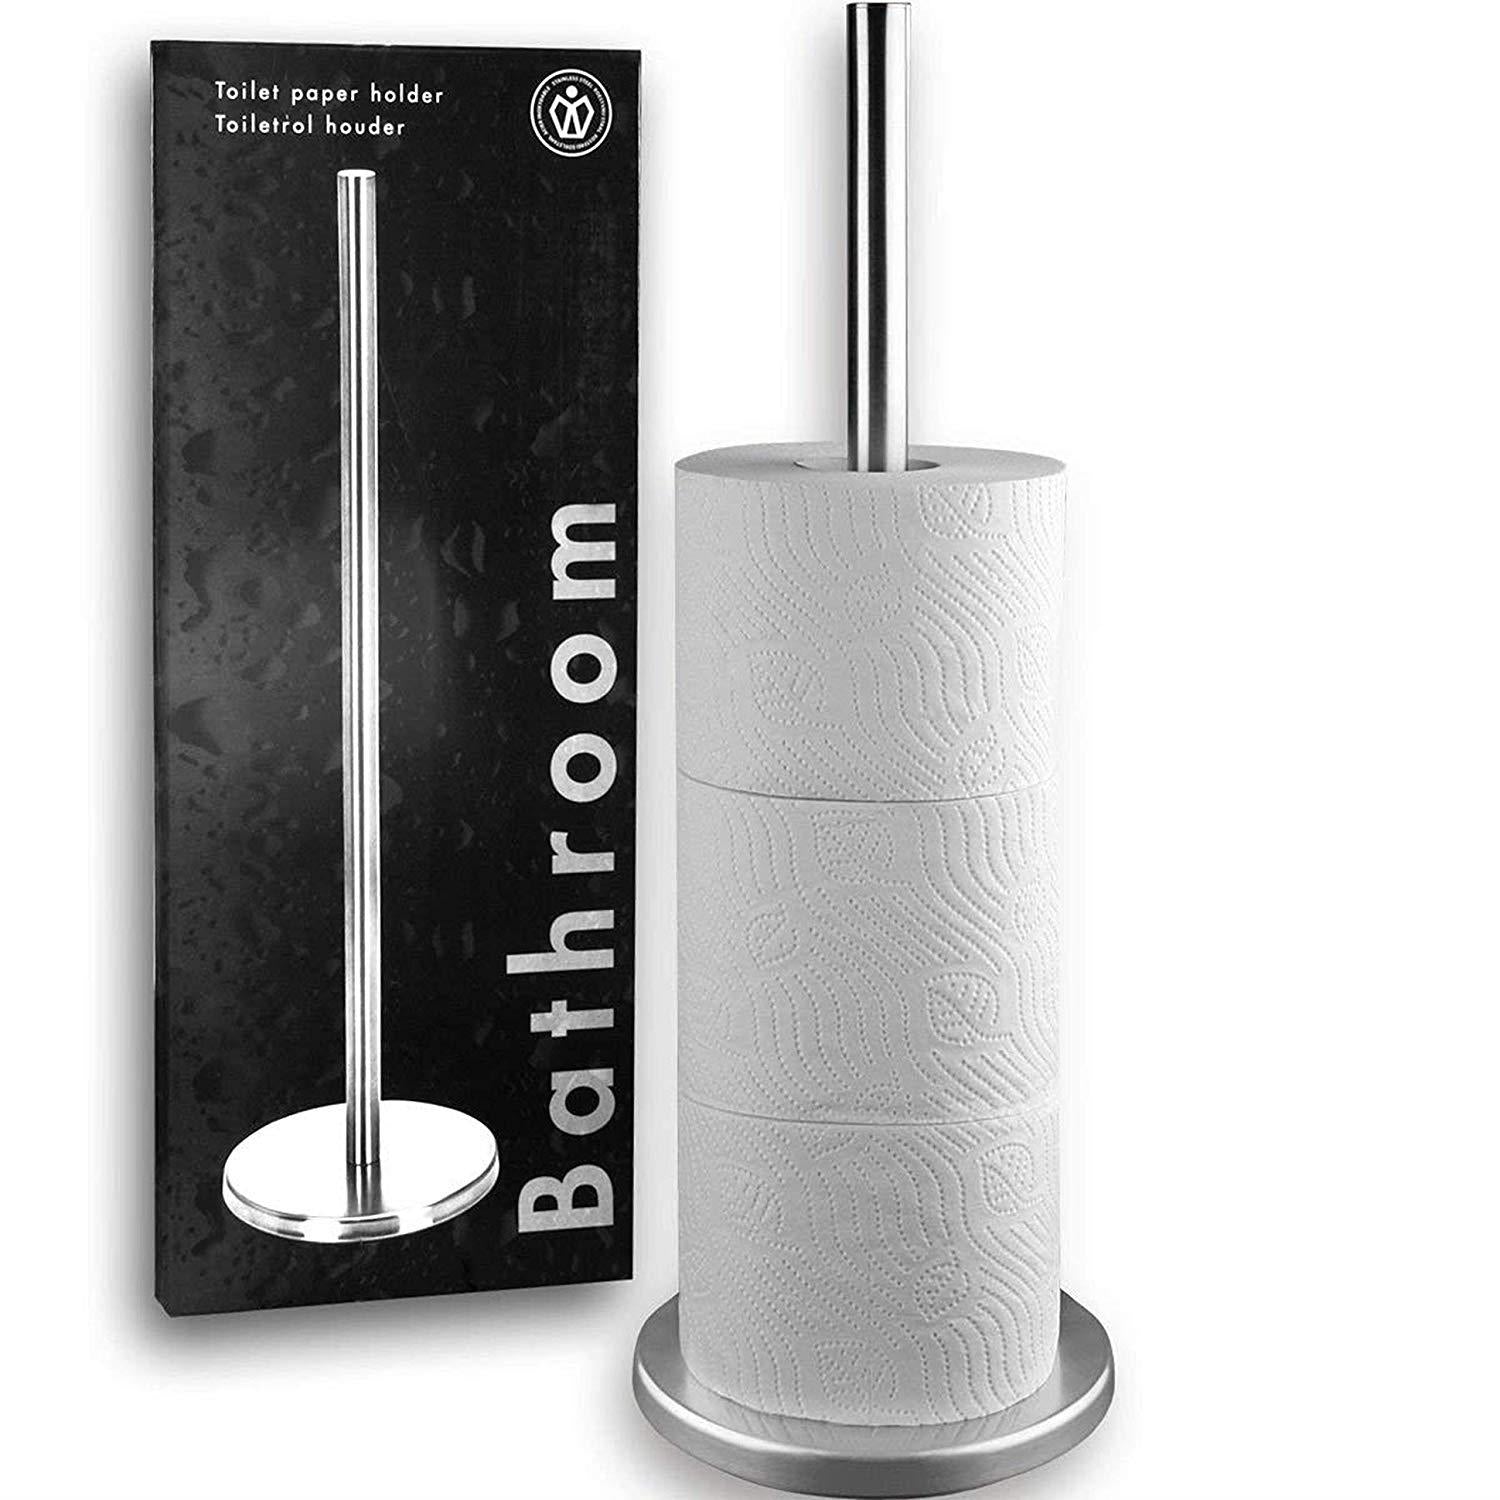 Stainless Steel Bathroom Toilet Paper Roll Holder by MTS - The Magic Toy Shop